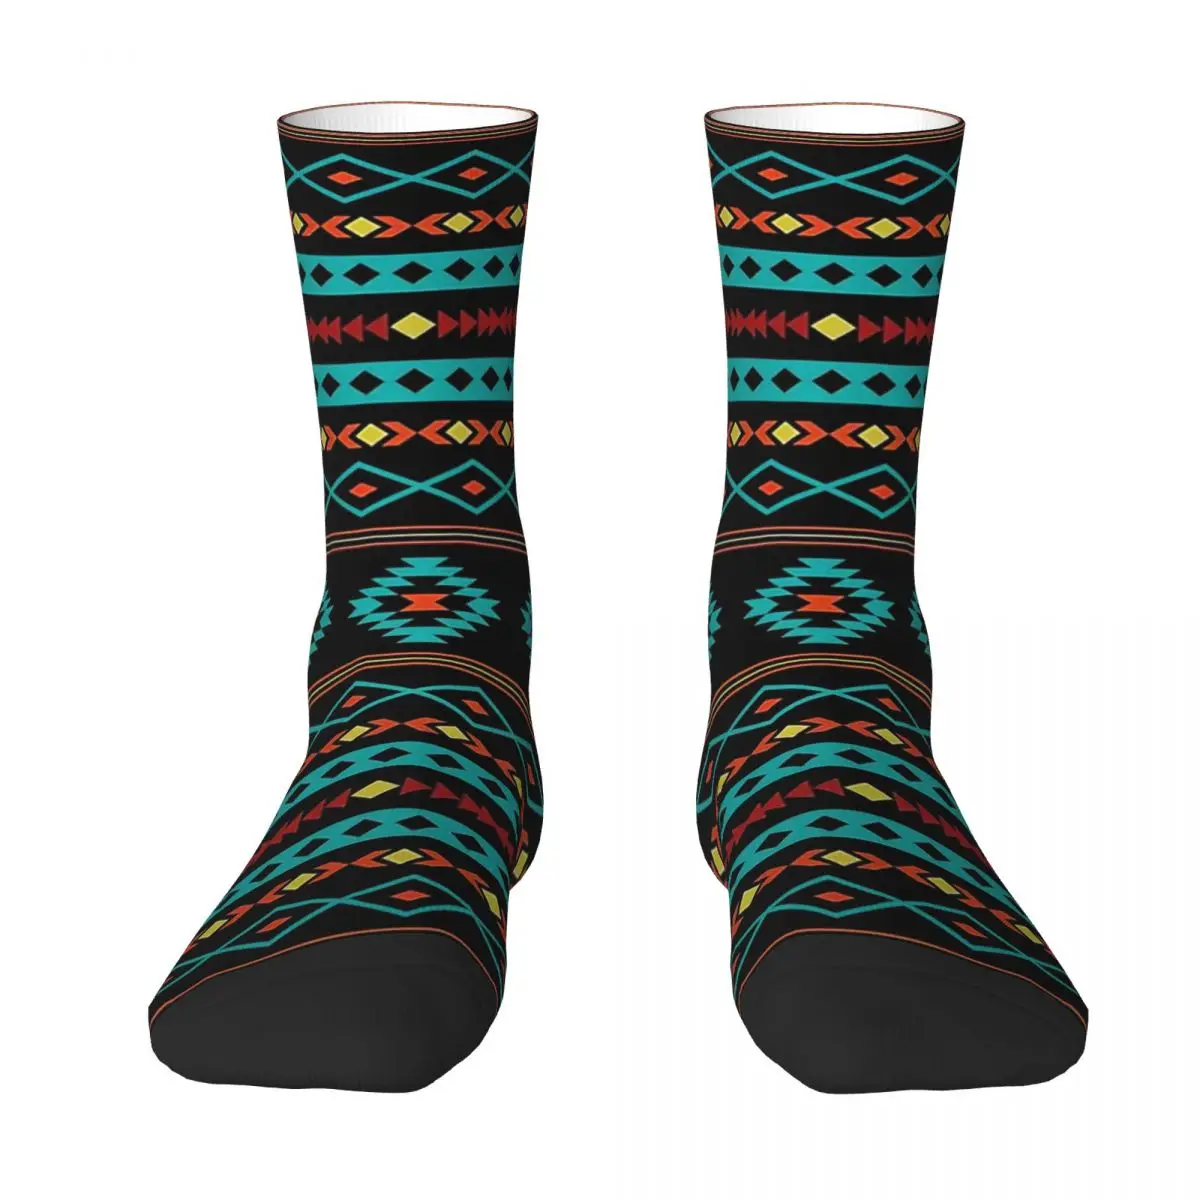 Aztec Teal Reds Yellow Black Mixed Motifs Pattern Adult Socks Unisex socks,men Socks women Socks men elastic pu leather belt canvas expandable braided stretch belts with mixed knitted black buckle 105cm factory directly price